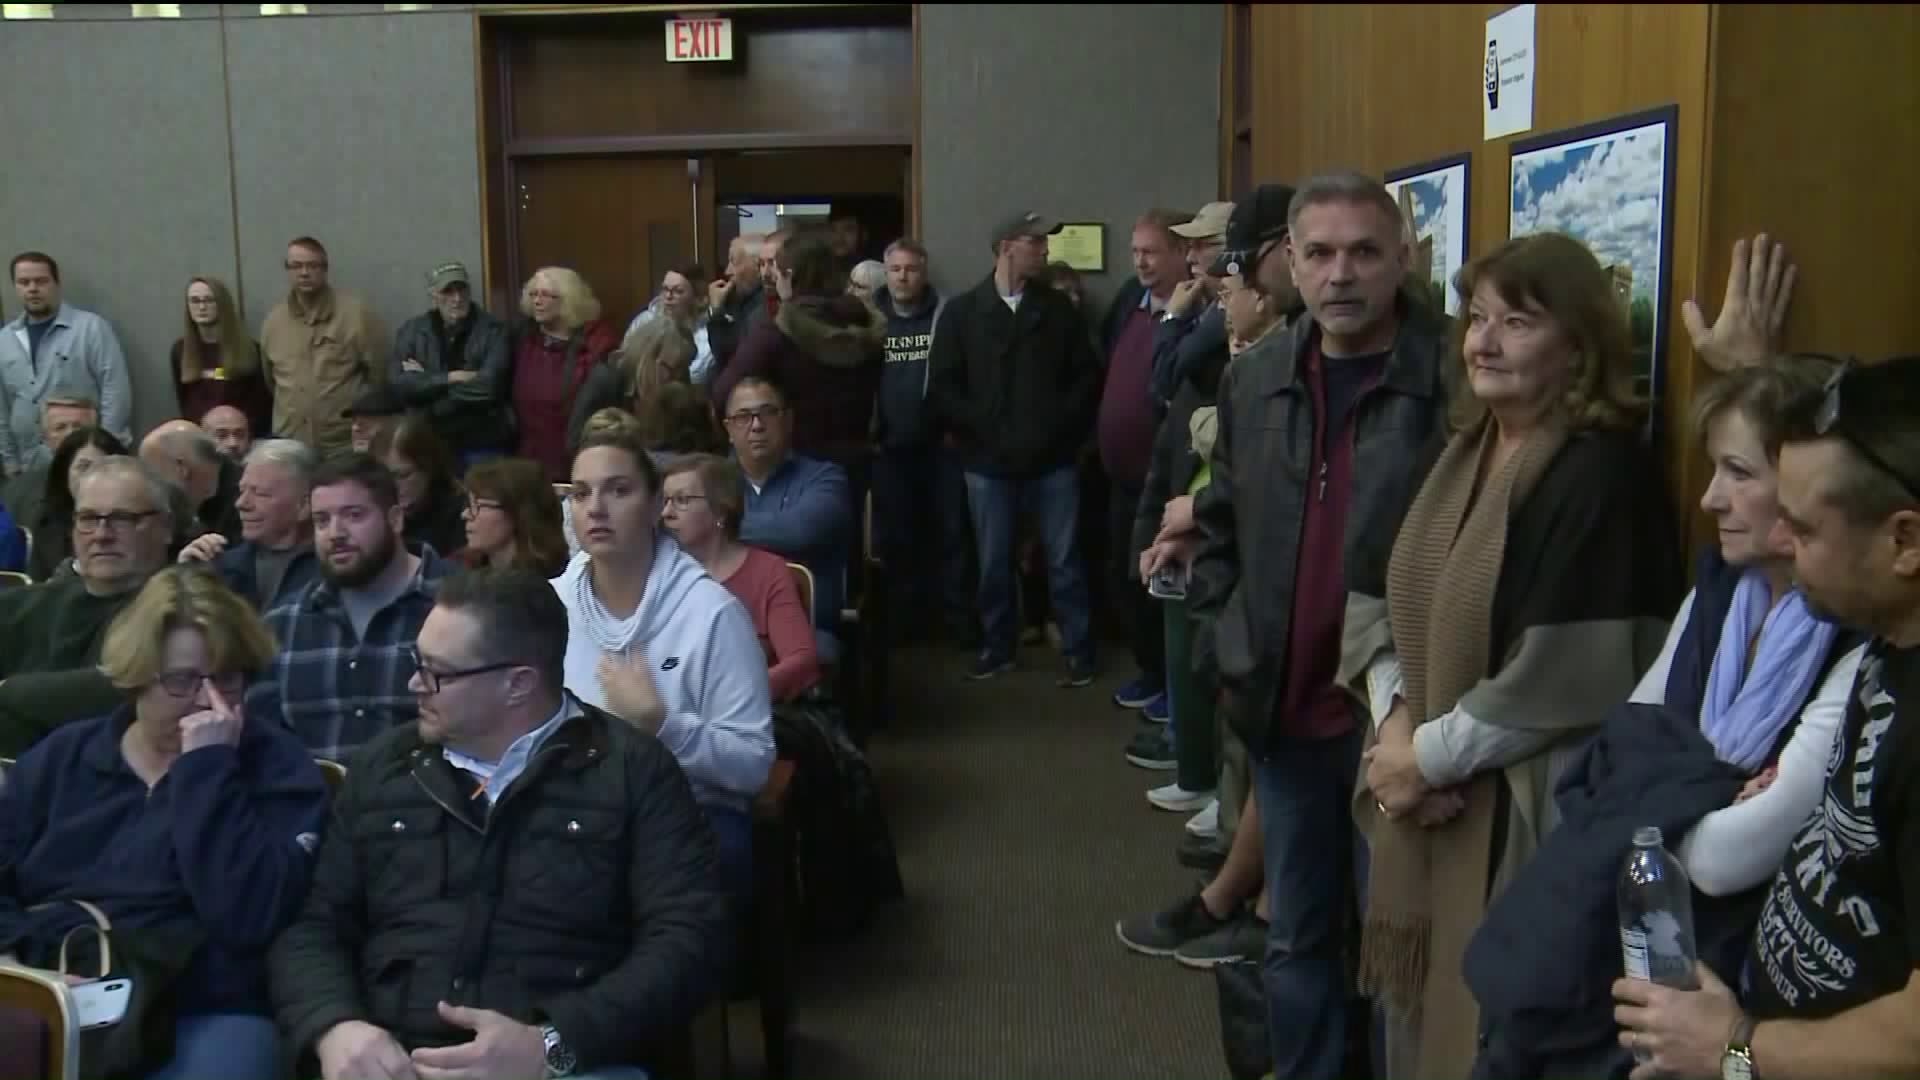 Bristol zoning meeting rescheduled due to overcapacity; chairman resigns